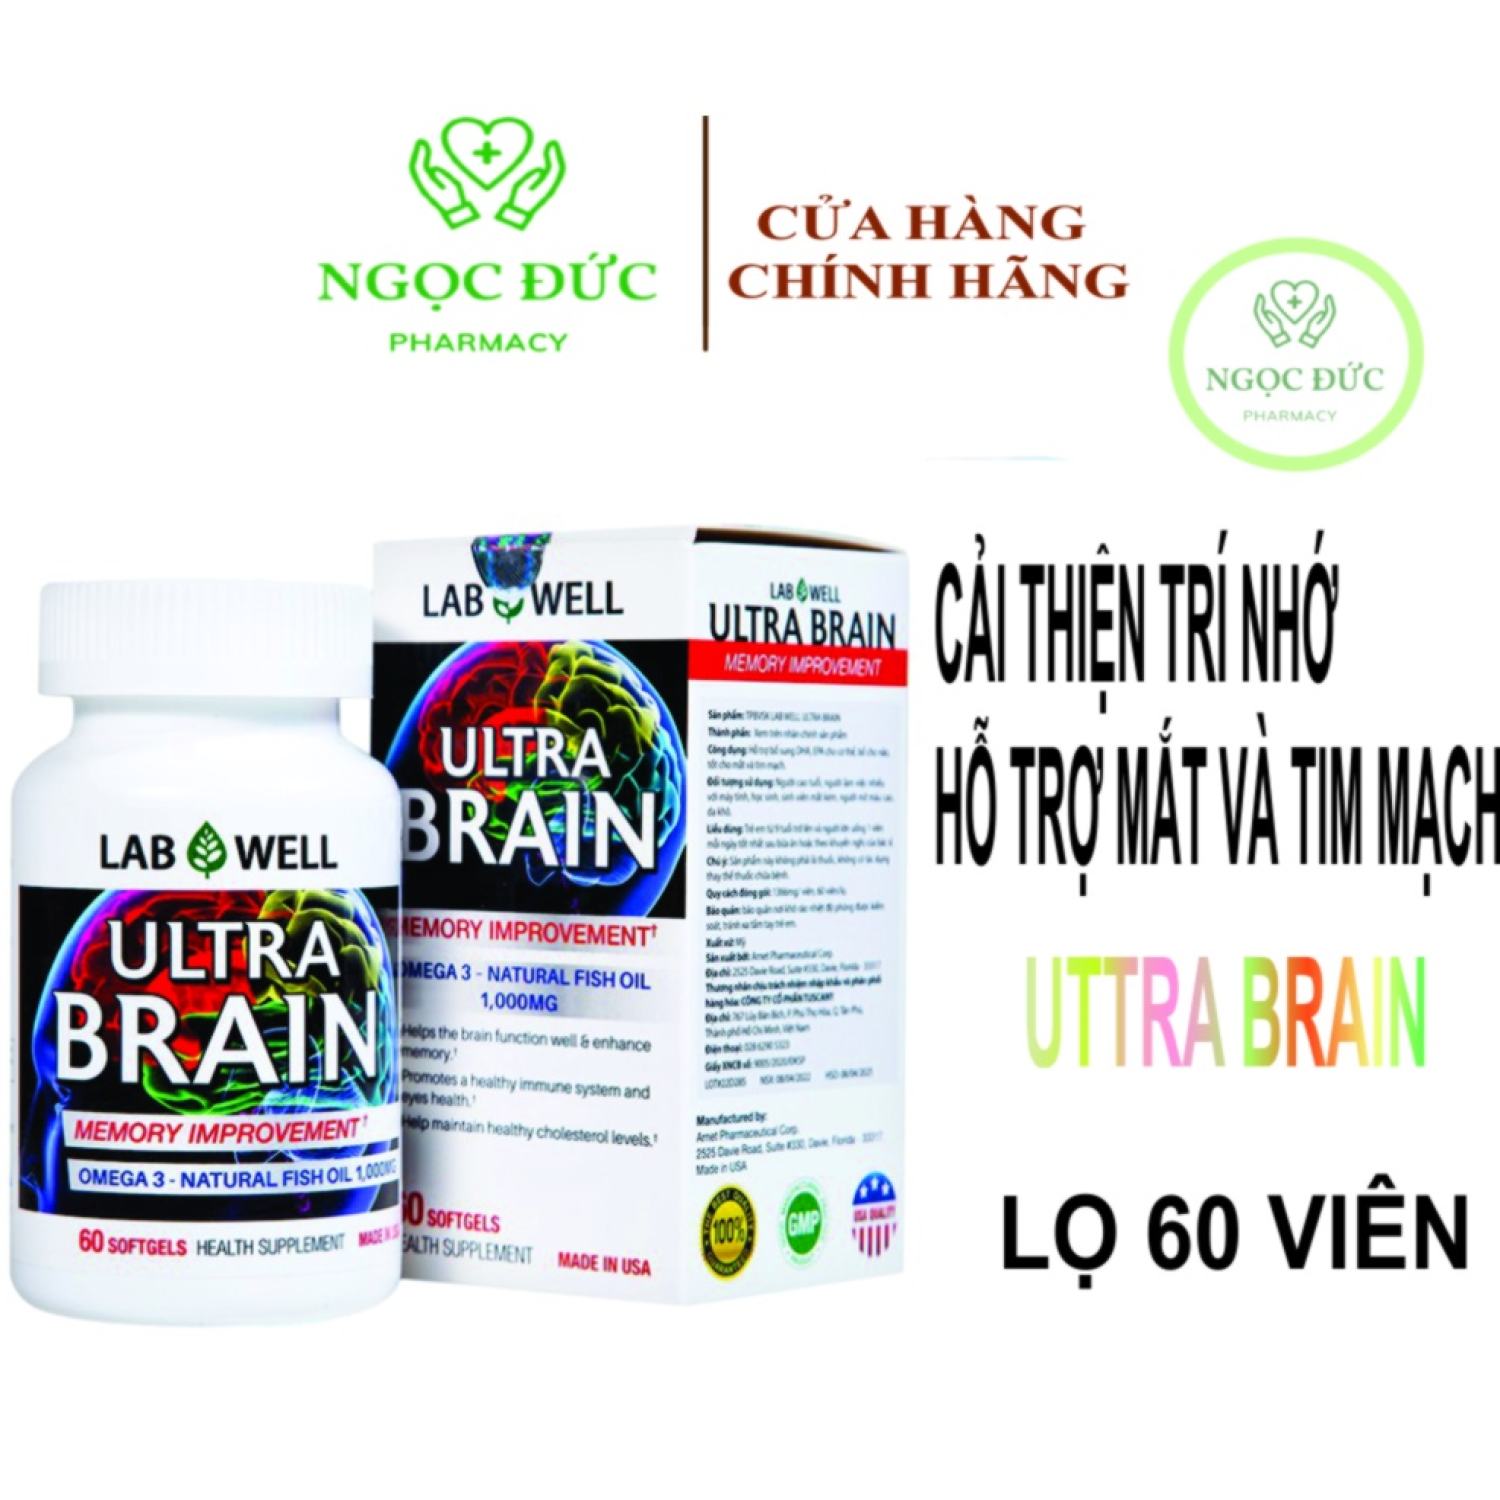 Oral tablets tonic brain ultra brain improve memory 60 tablets